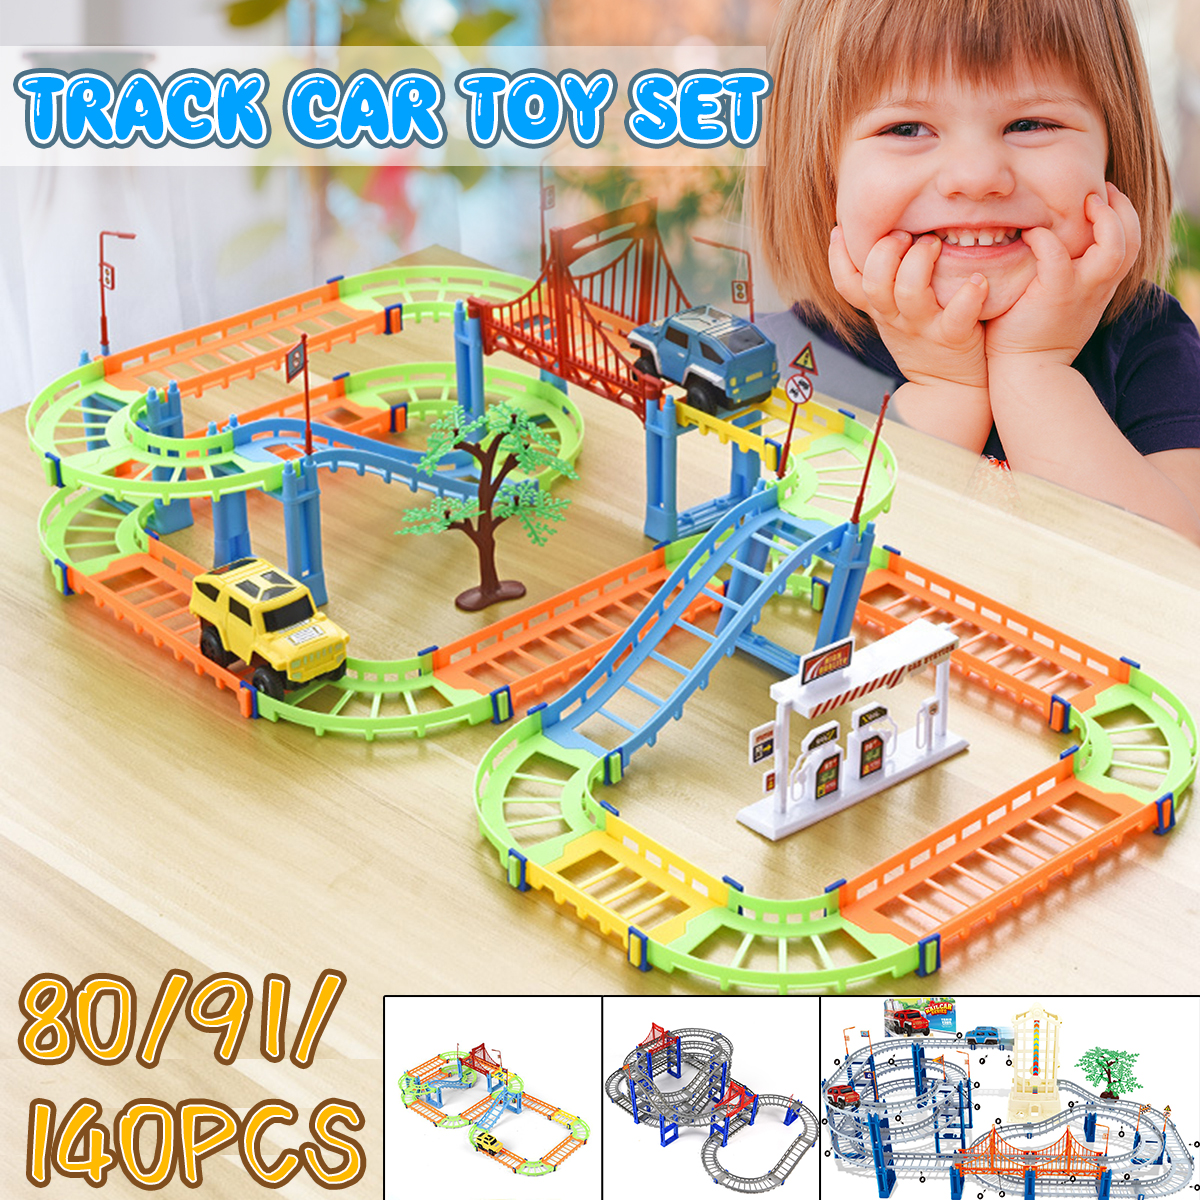 8091140Pcs-DIY-Assembly-Electric-ABS-Track-Car-Model-Set-Puzzle-Educational-Toy-for-Kids-1865726-1